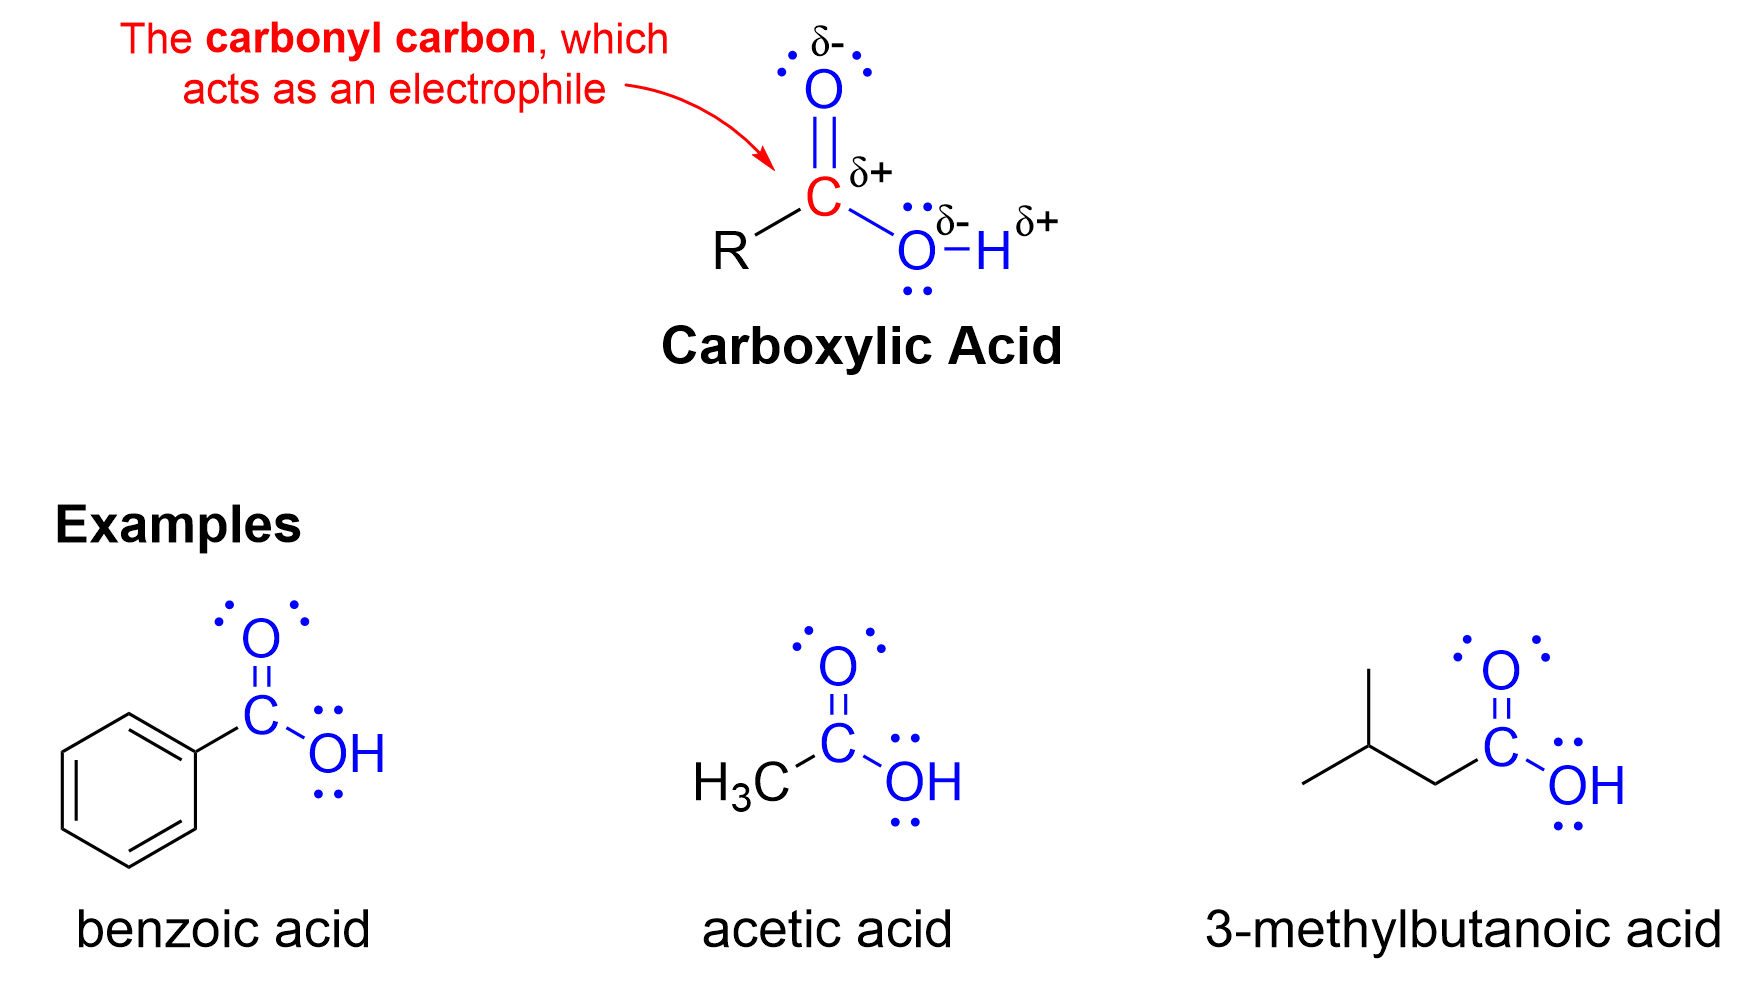 A carboxylic acid, similar in structure to an aldehyde, contains a central/carbonyl carbon bonded to an R-group, double bonded to an oxygen, and is also bonded to a OH group. The carbonyl carbon is the electrophile, and some examples of carboxylic acids are benzoic acid where the R group is a benzene, and acetic acid where the R group is a methyl.